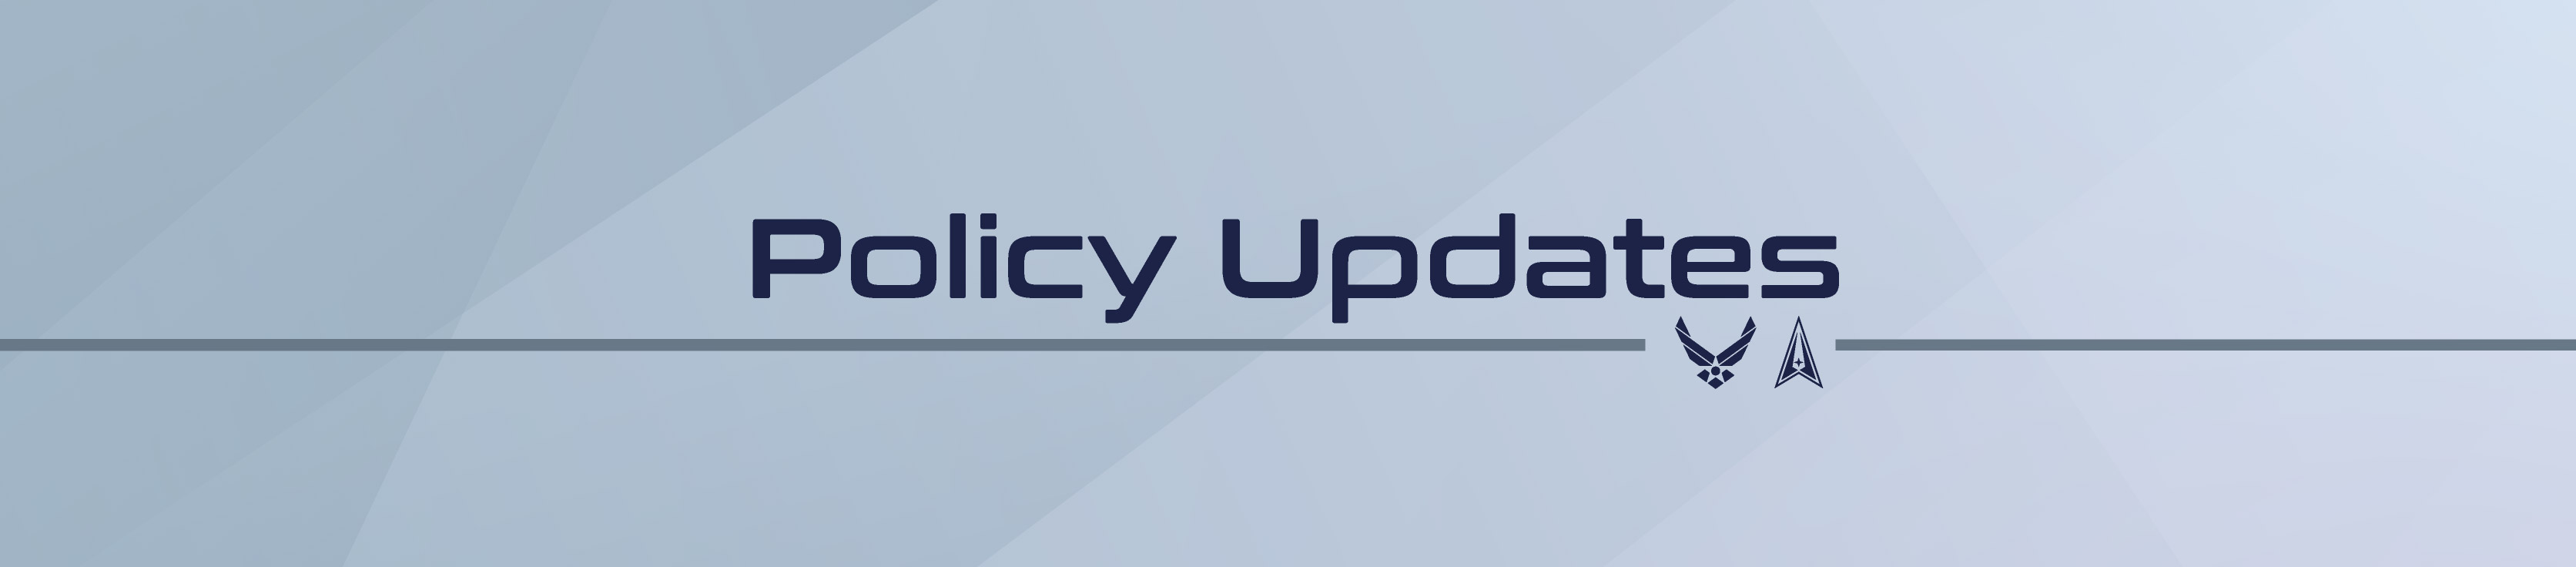 Policy Updates Button